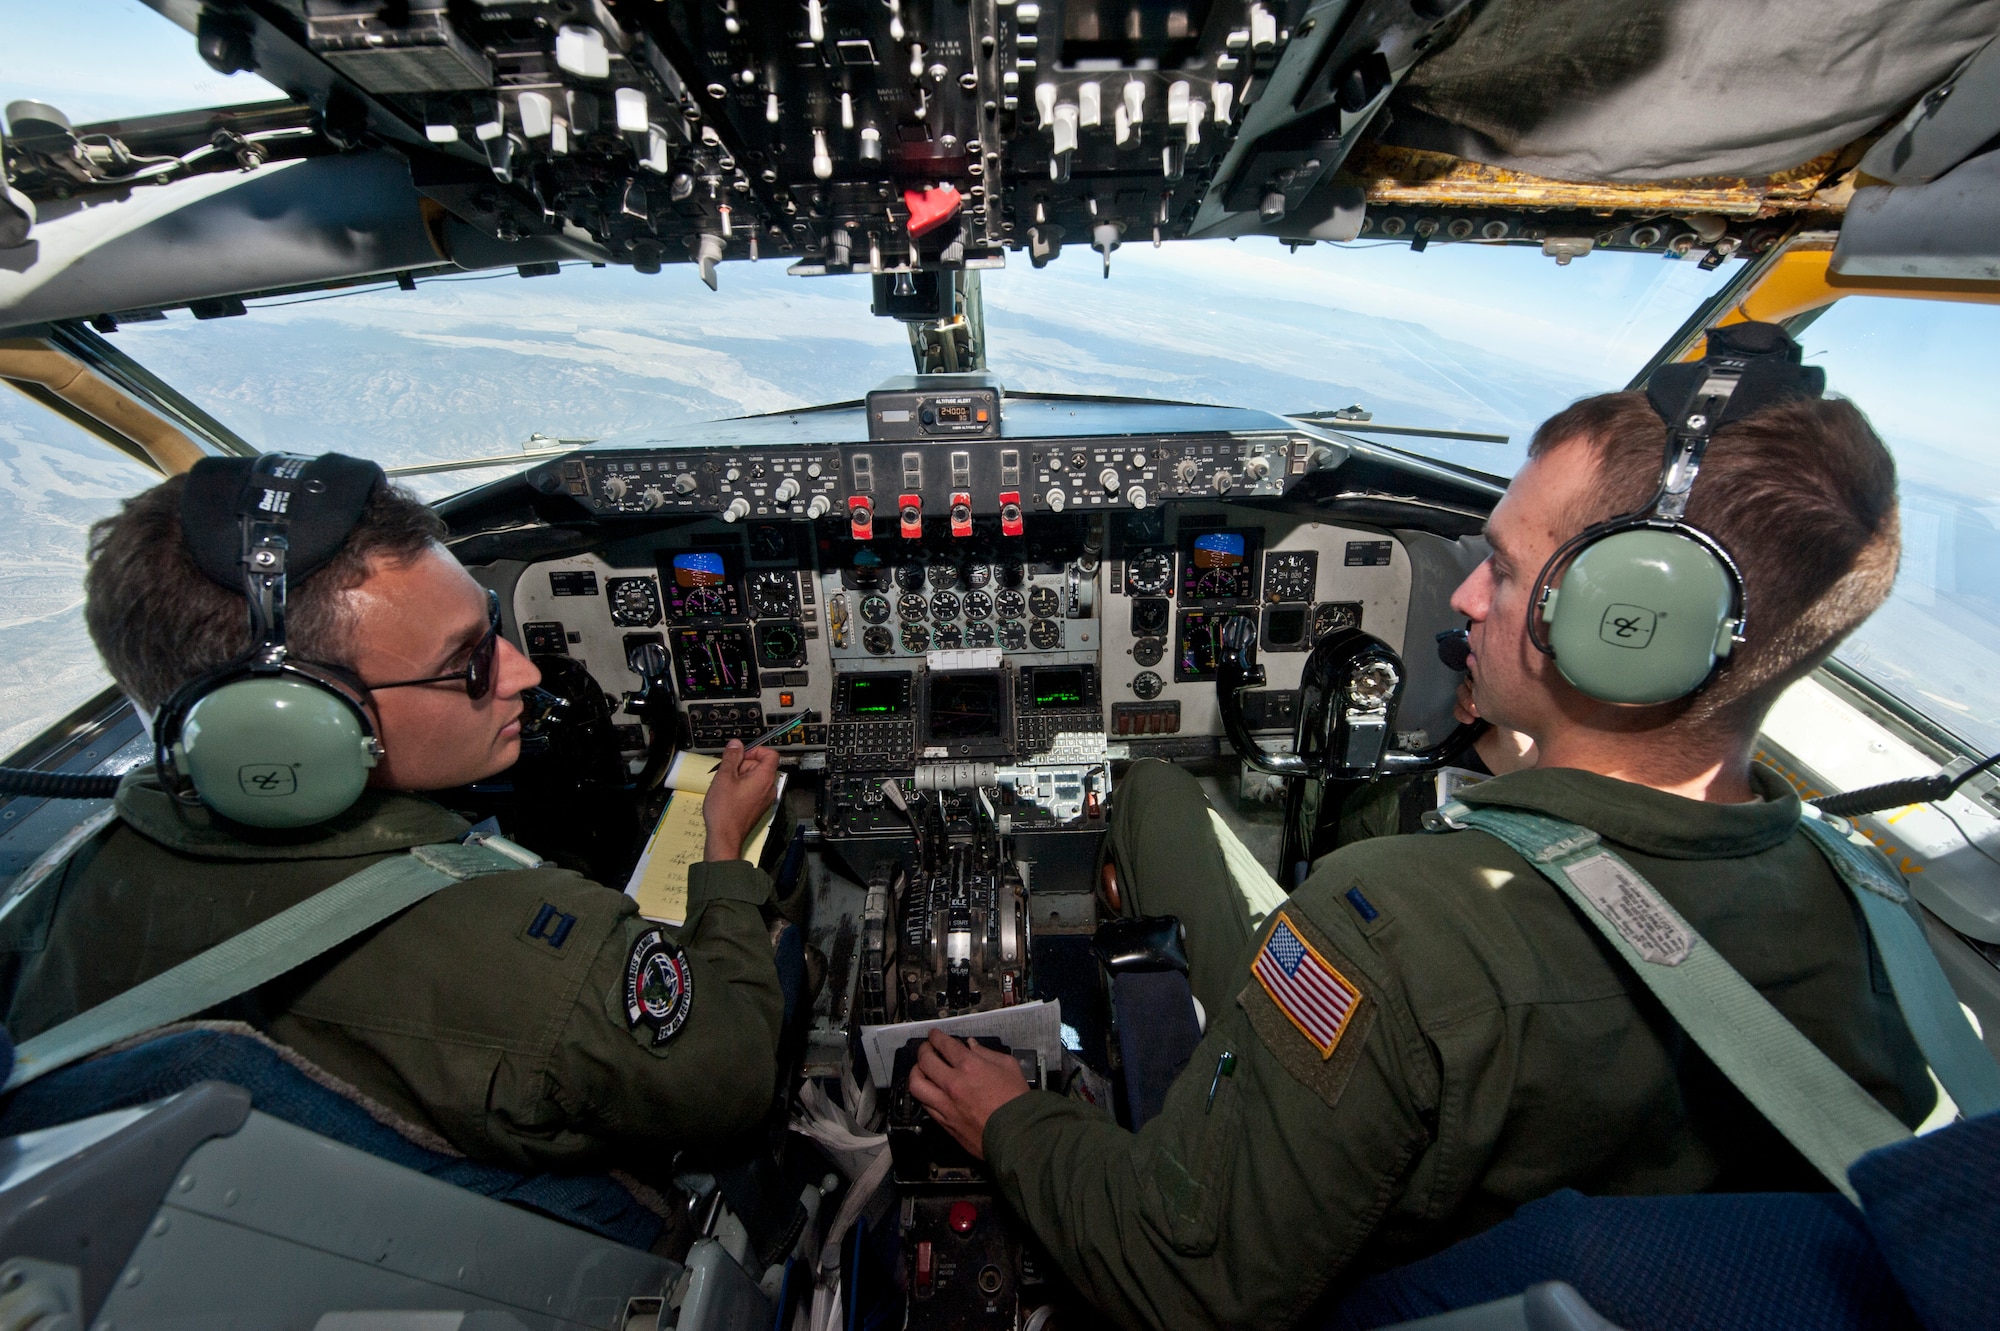 Capt. Taylor Ellington and 1st Lt. Matthew Street, both pilots assigned to the 92nd Air Refueling Wing, Fairchild Air Force Base, Wash., discuss notes while flying a Red Flag 15-3 training mission over the Nevada Test and Training Range, July 24, 2015. During Red Flag, KC-135s circle the skies refueling fighter aircraft to expand their training missions. (U.S. Air Force photo by Airman 1st Class Jake Carter)